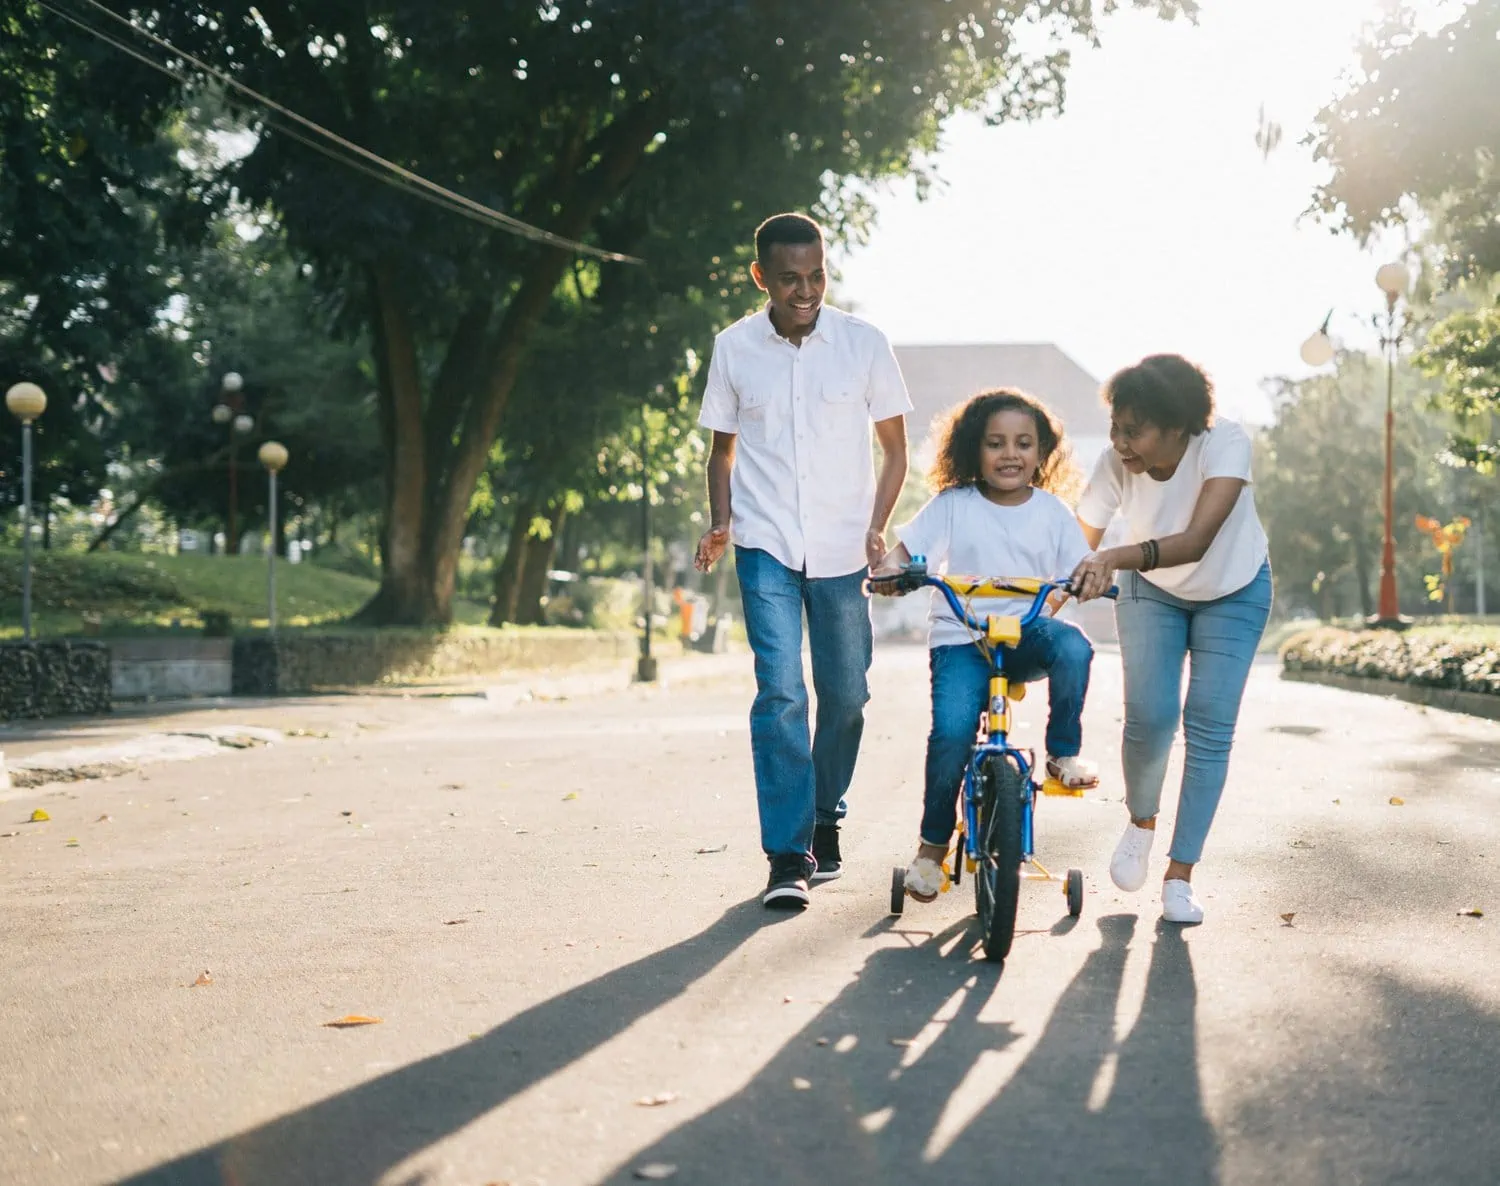 Mom and dad teaching daughter to ride a bike so their purpose is to teach